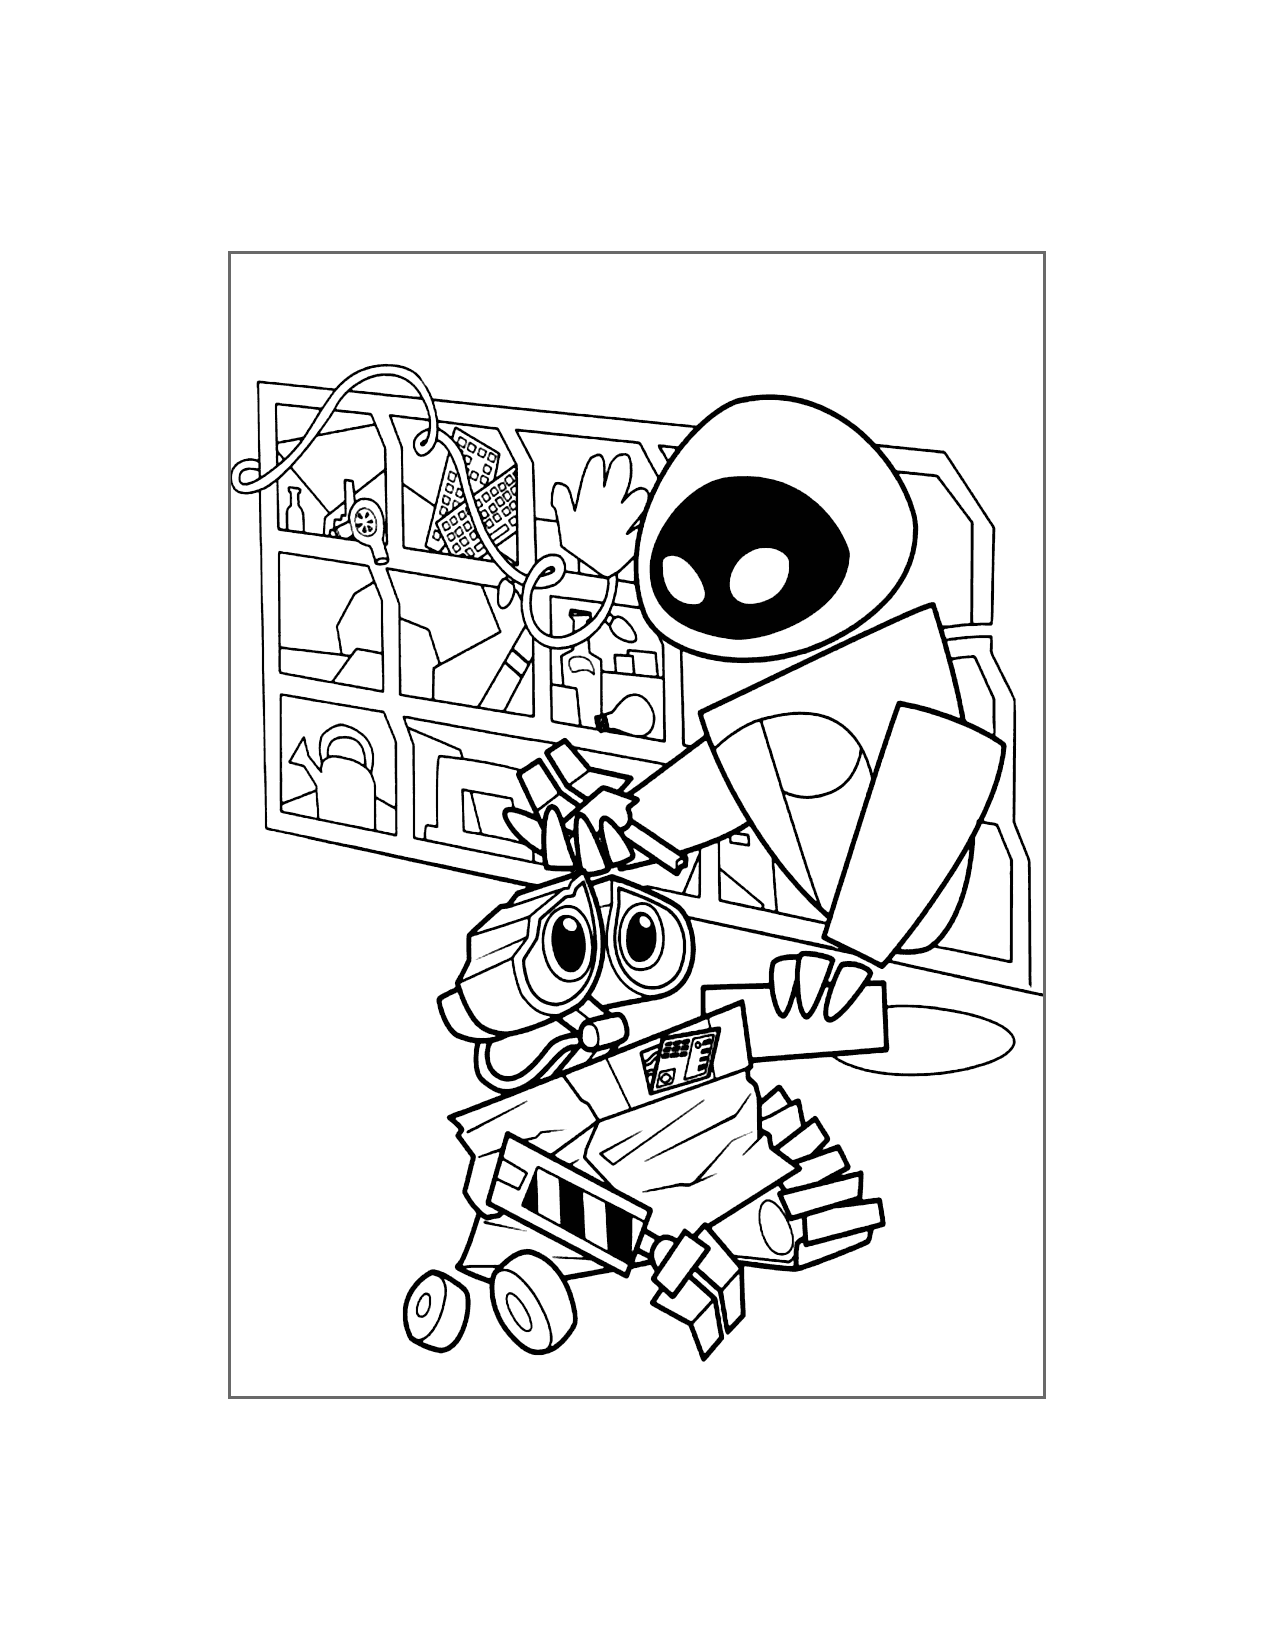 Eve Rebuilds Wall E Coloring Page